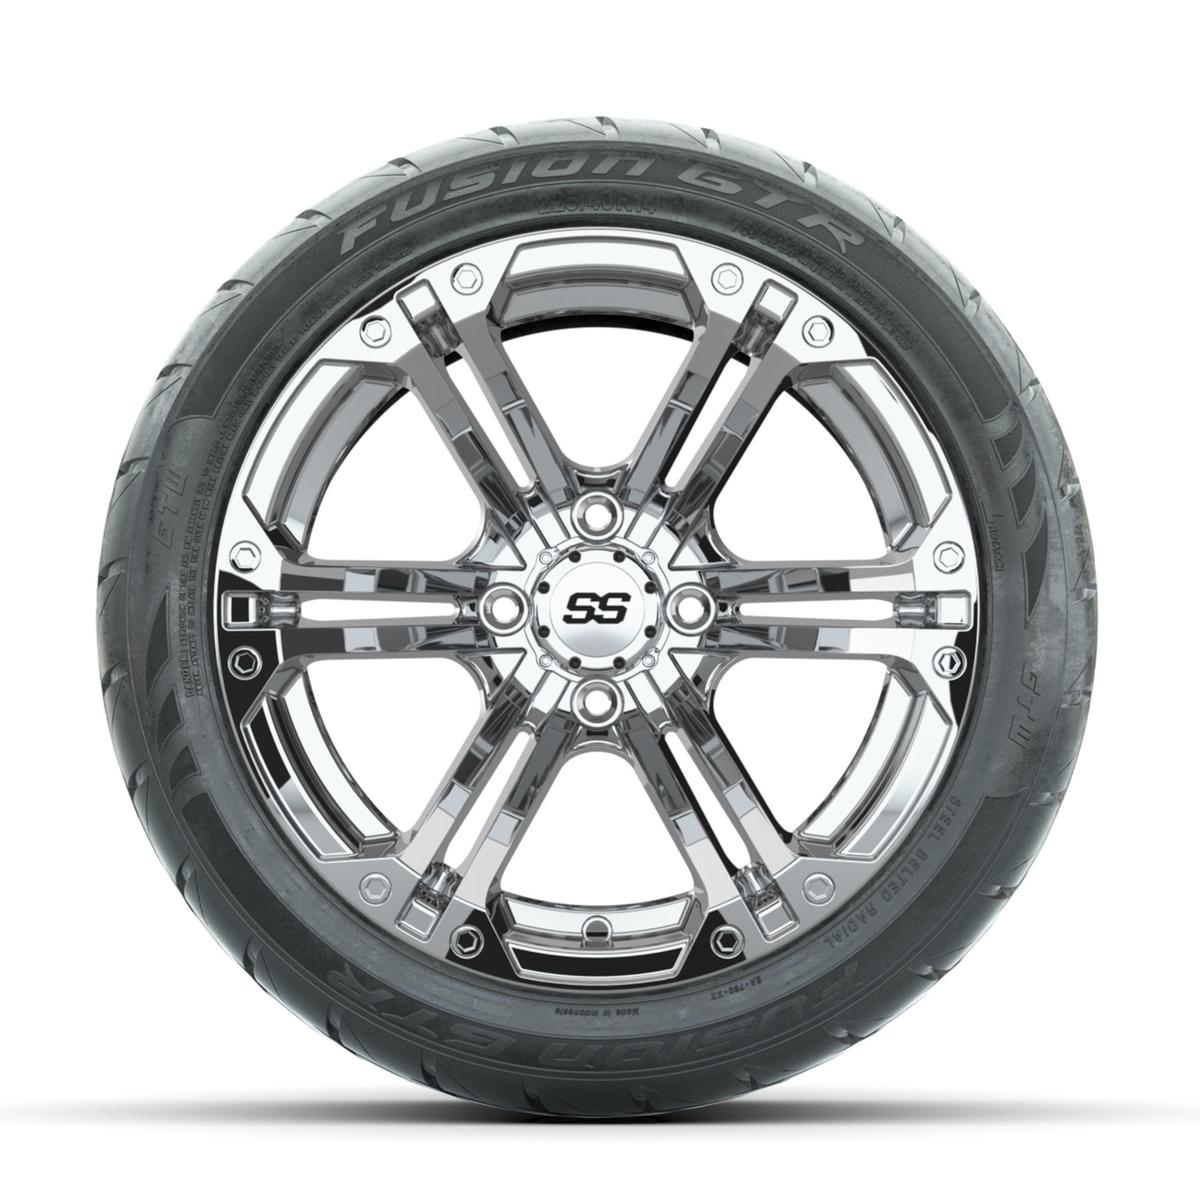 GTW Specter Chrome 14 in Wheels with 225/40-R14 Fusion GTR Street Tires – Full Set